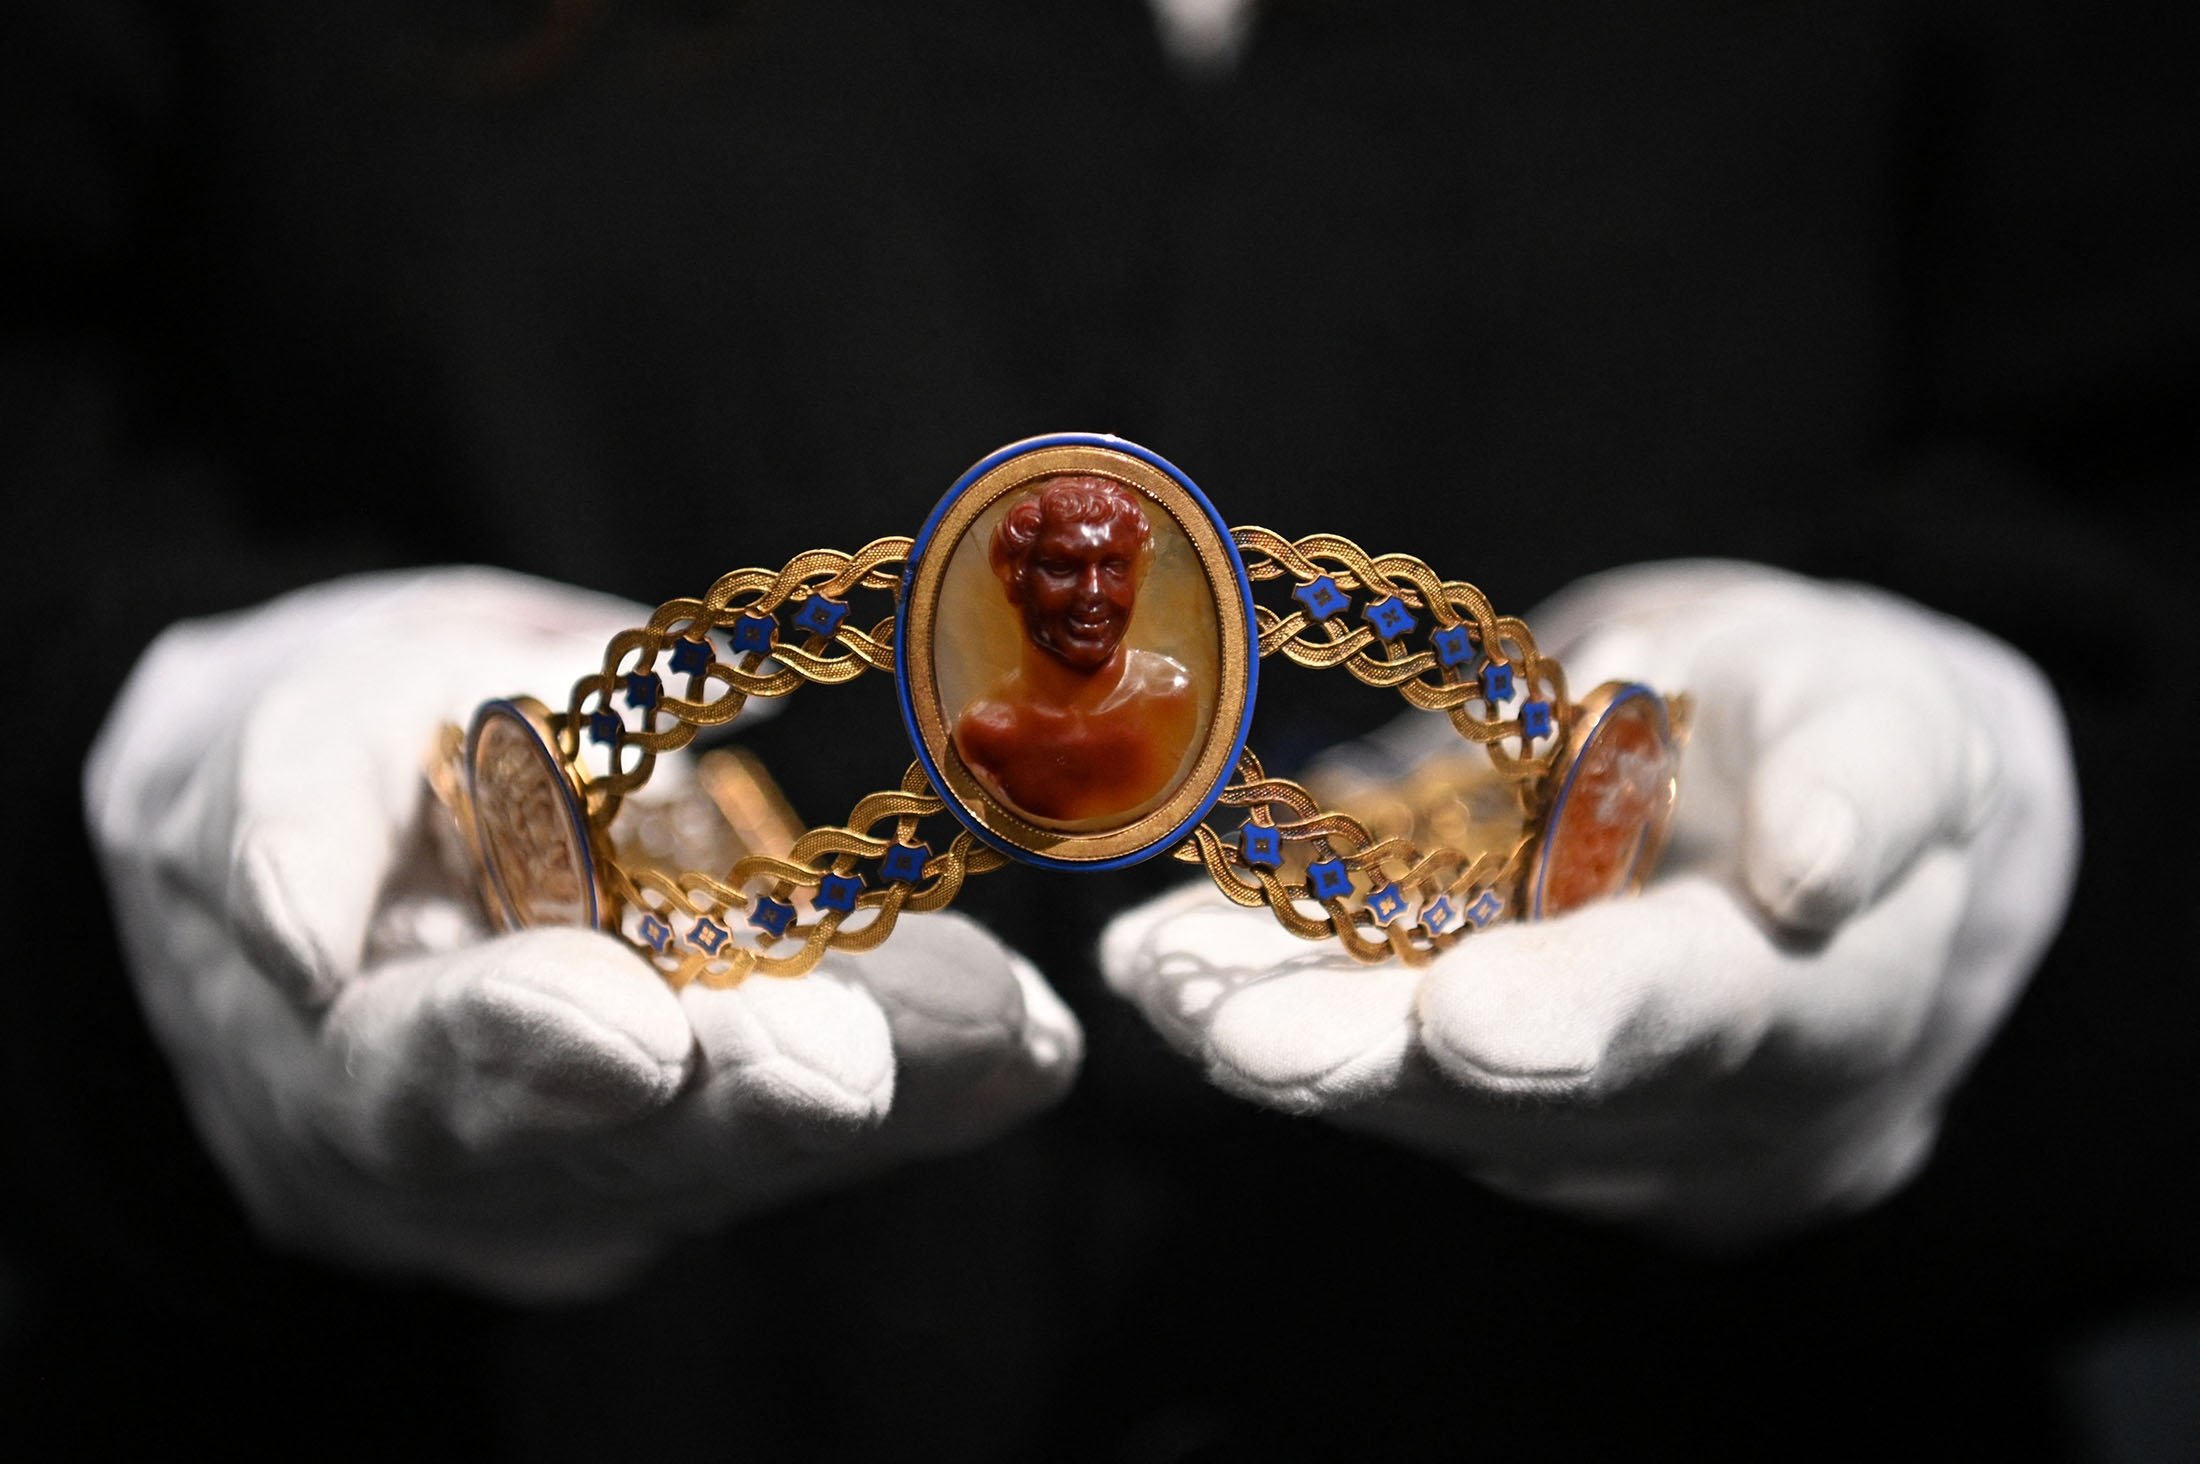 A gold, cameo and enamel diadem by Jacques-Amboise Oliveras, circa 1808, believed to have belonged to Empress Josephine Bonaparte of France, is displayed during a photocall at Sotheby's Auction House in London, U.K., Dec. 3, 2021. (AFP Photo)